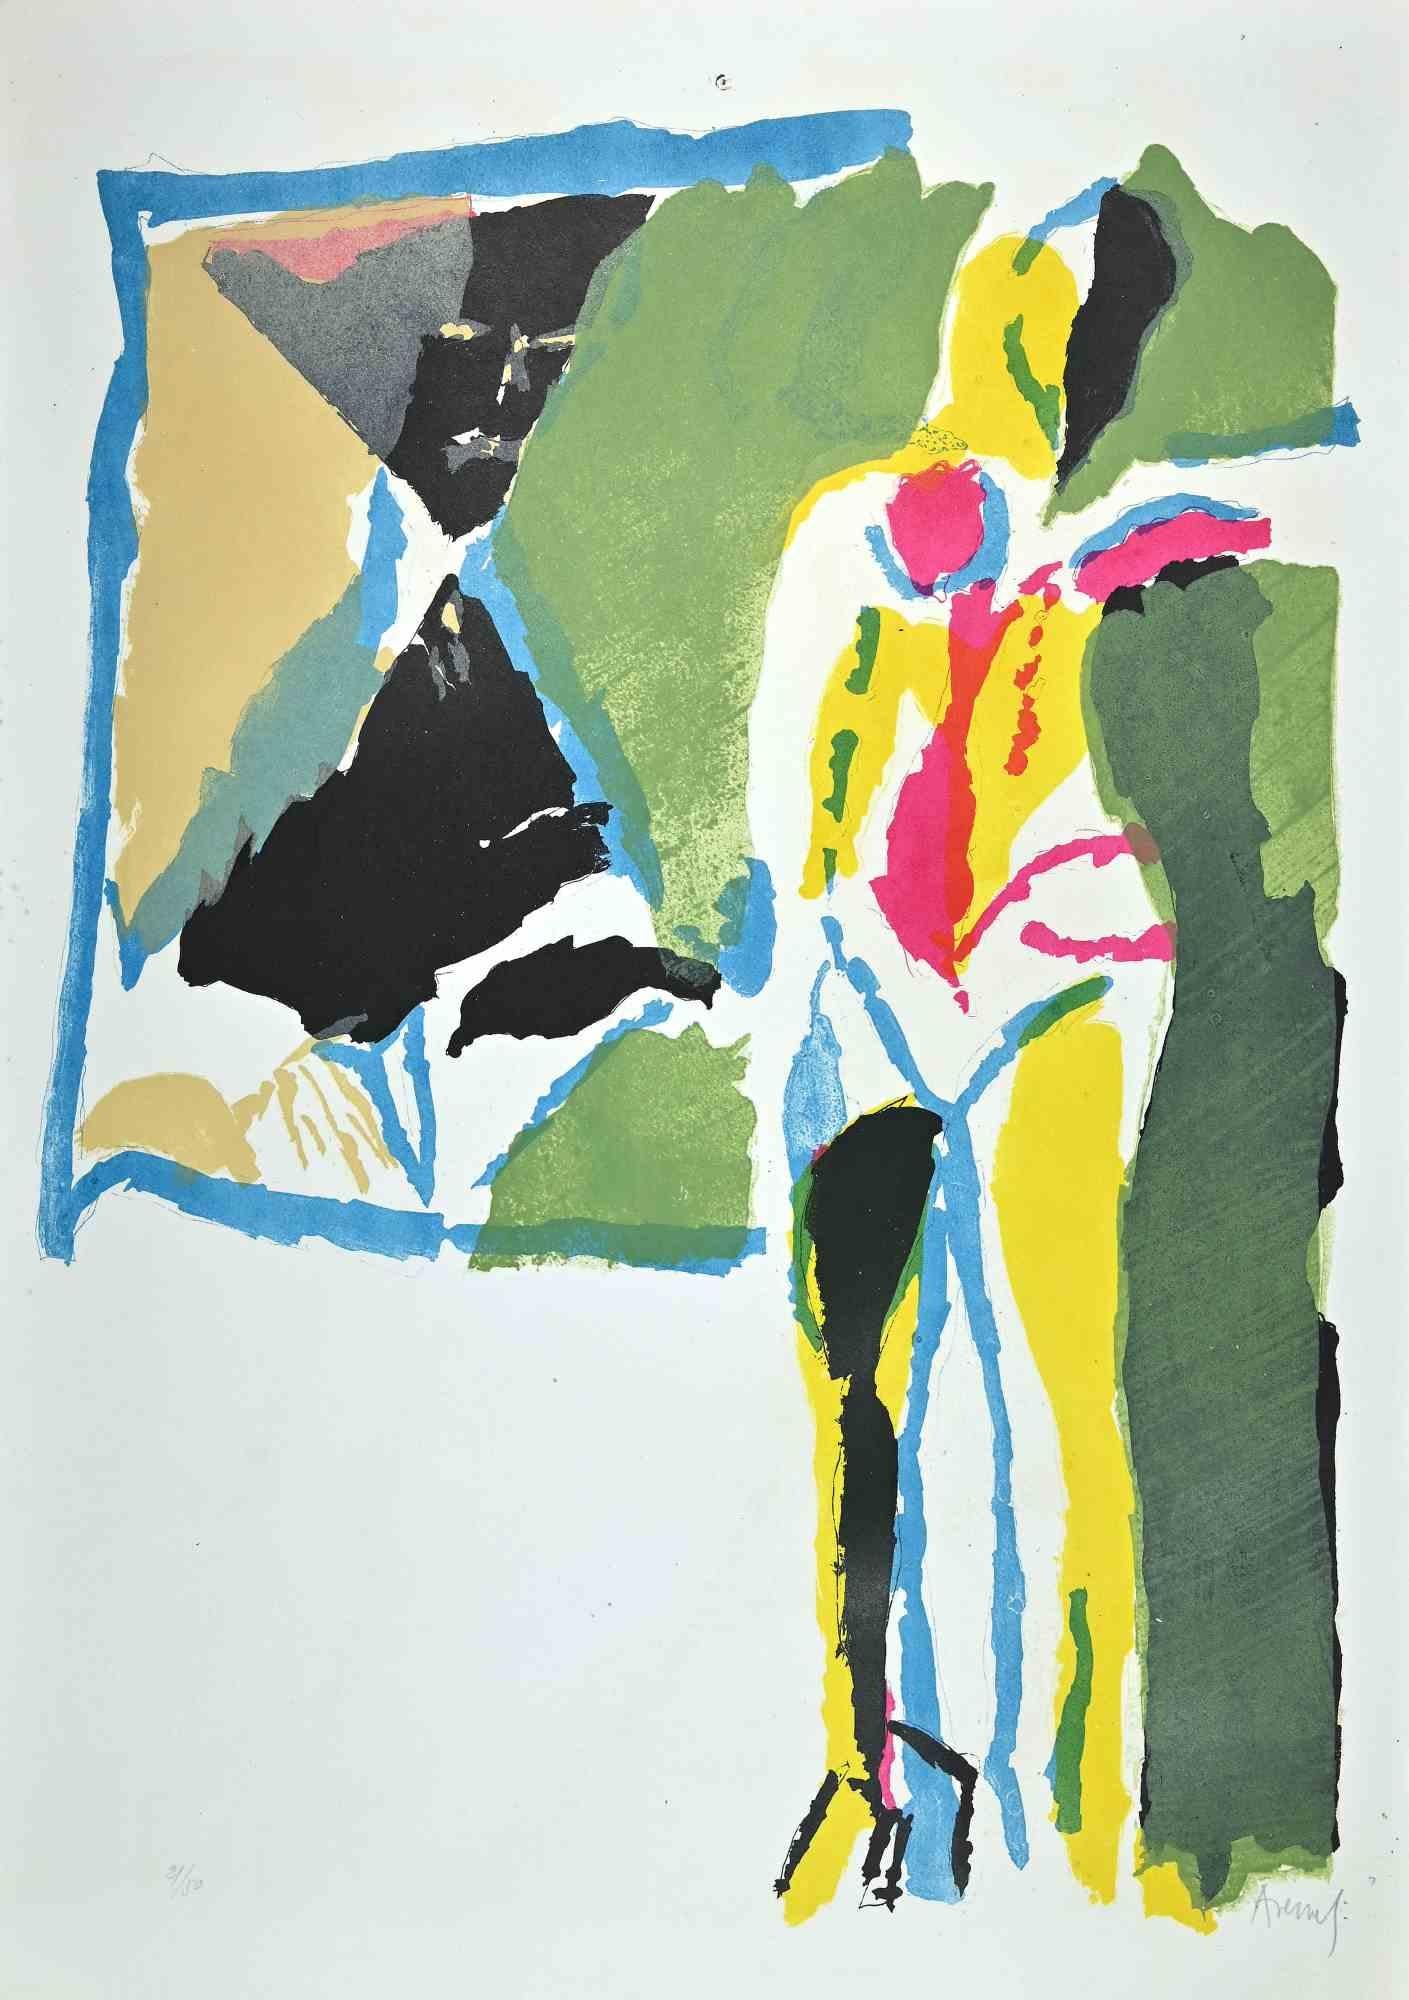 Marcello Avenali Abstract Print - Asymmetric Abstract Composition -  Lithograph by M. Avenali - 1960s